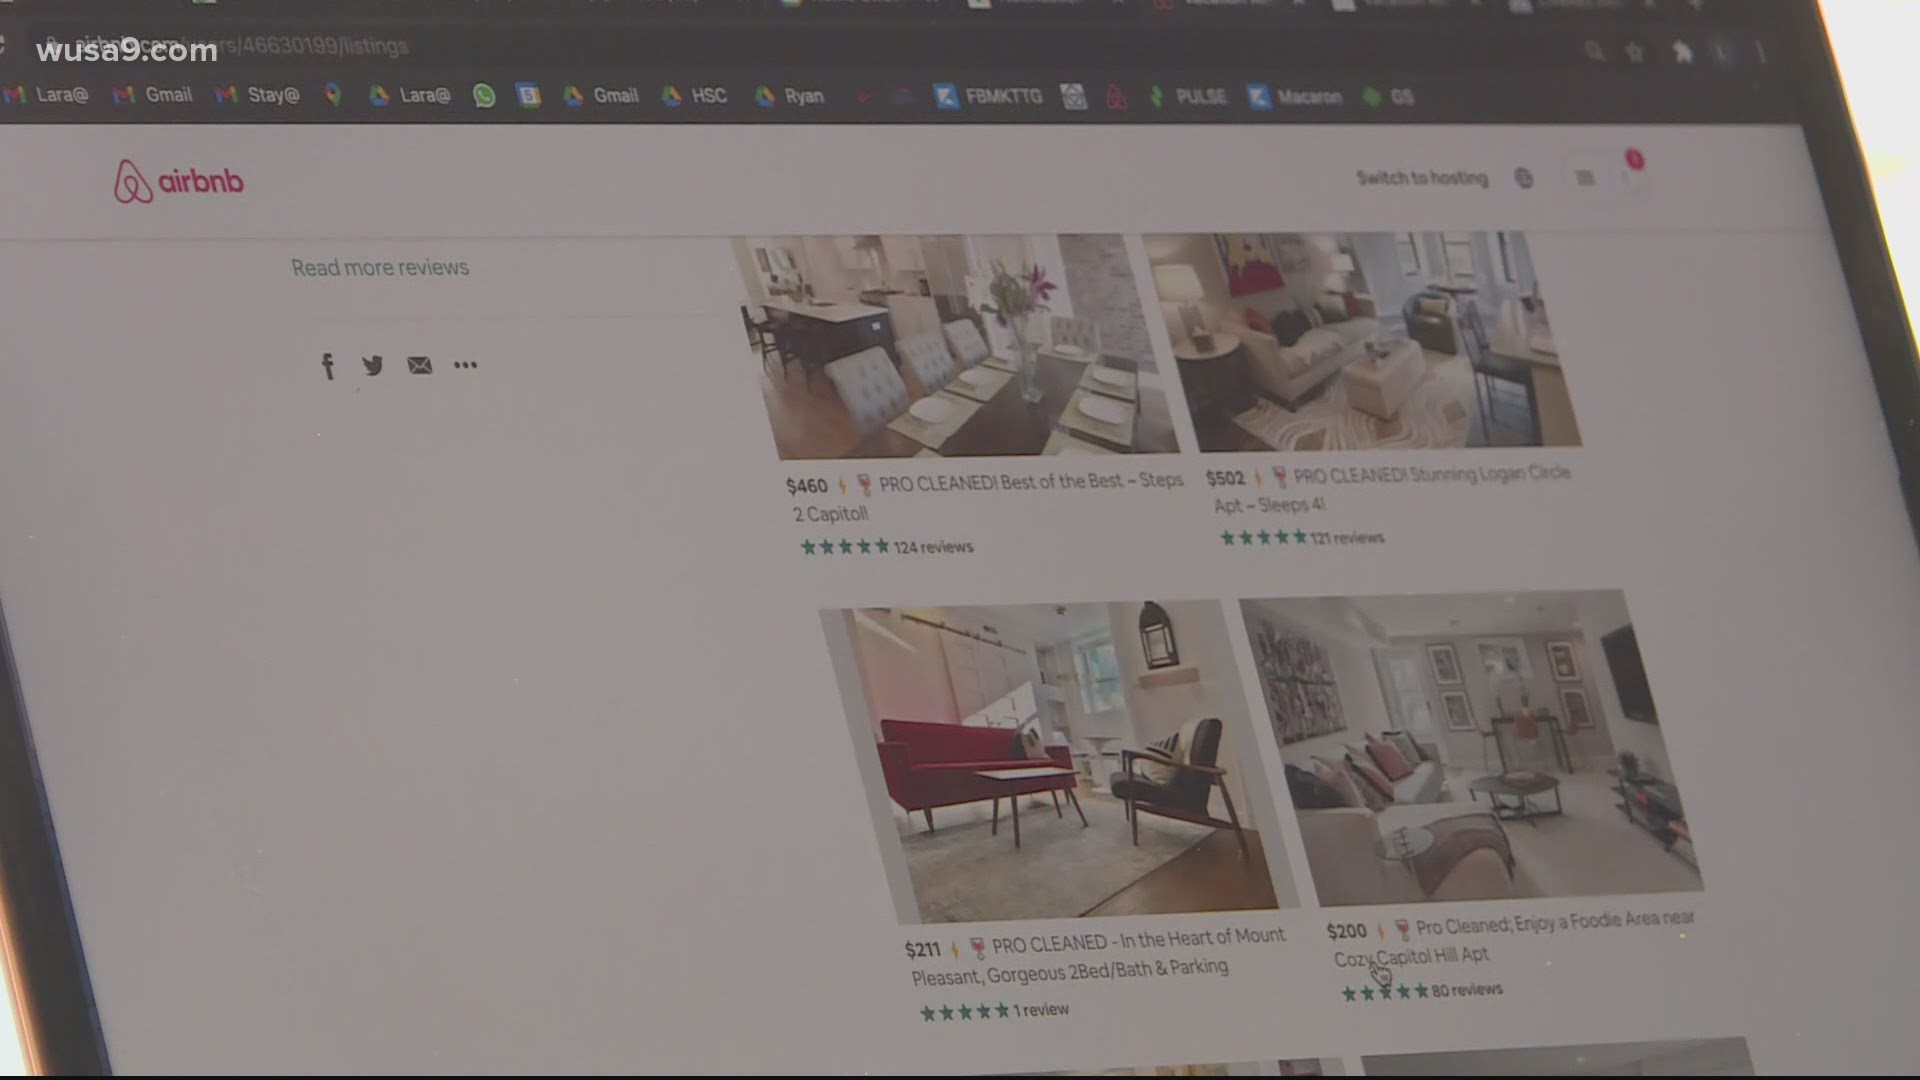 The company said it's also working to determine whether anyone responsible for the Capitol riot has an account on Airbnb, and will ban them from the platform.